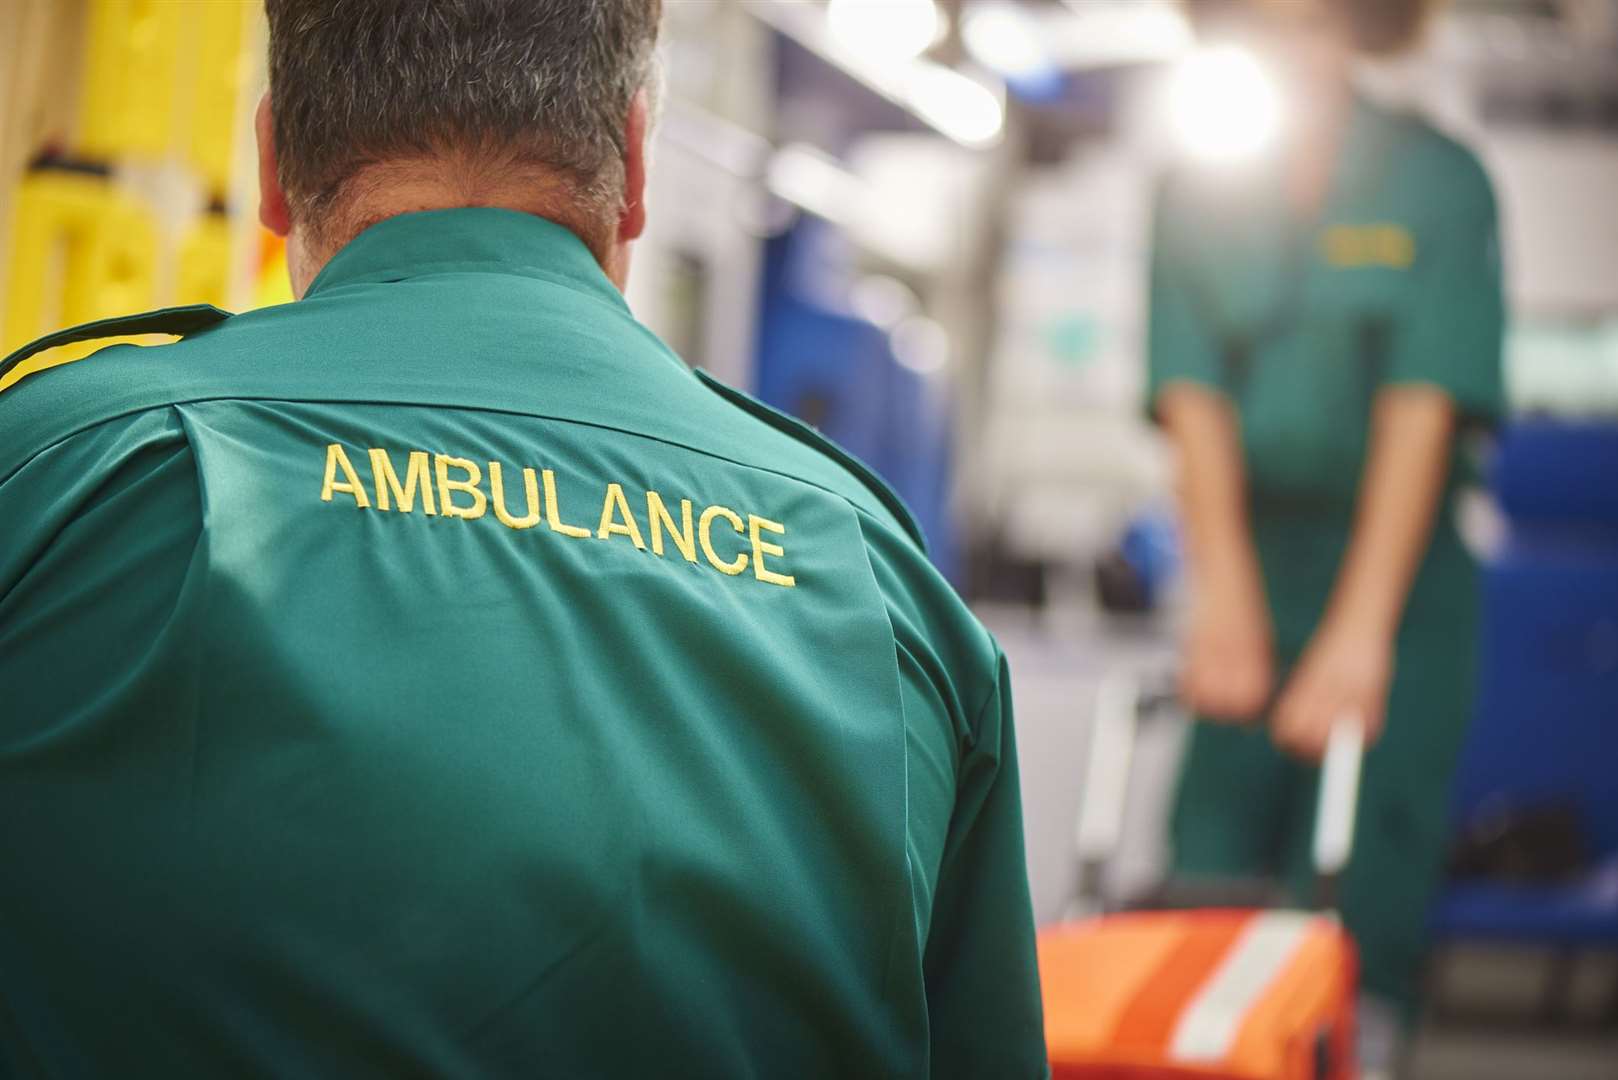 Close to 20,000 ambulance workers are expected to take part in the ballot says their union. Image: File image.